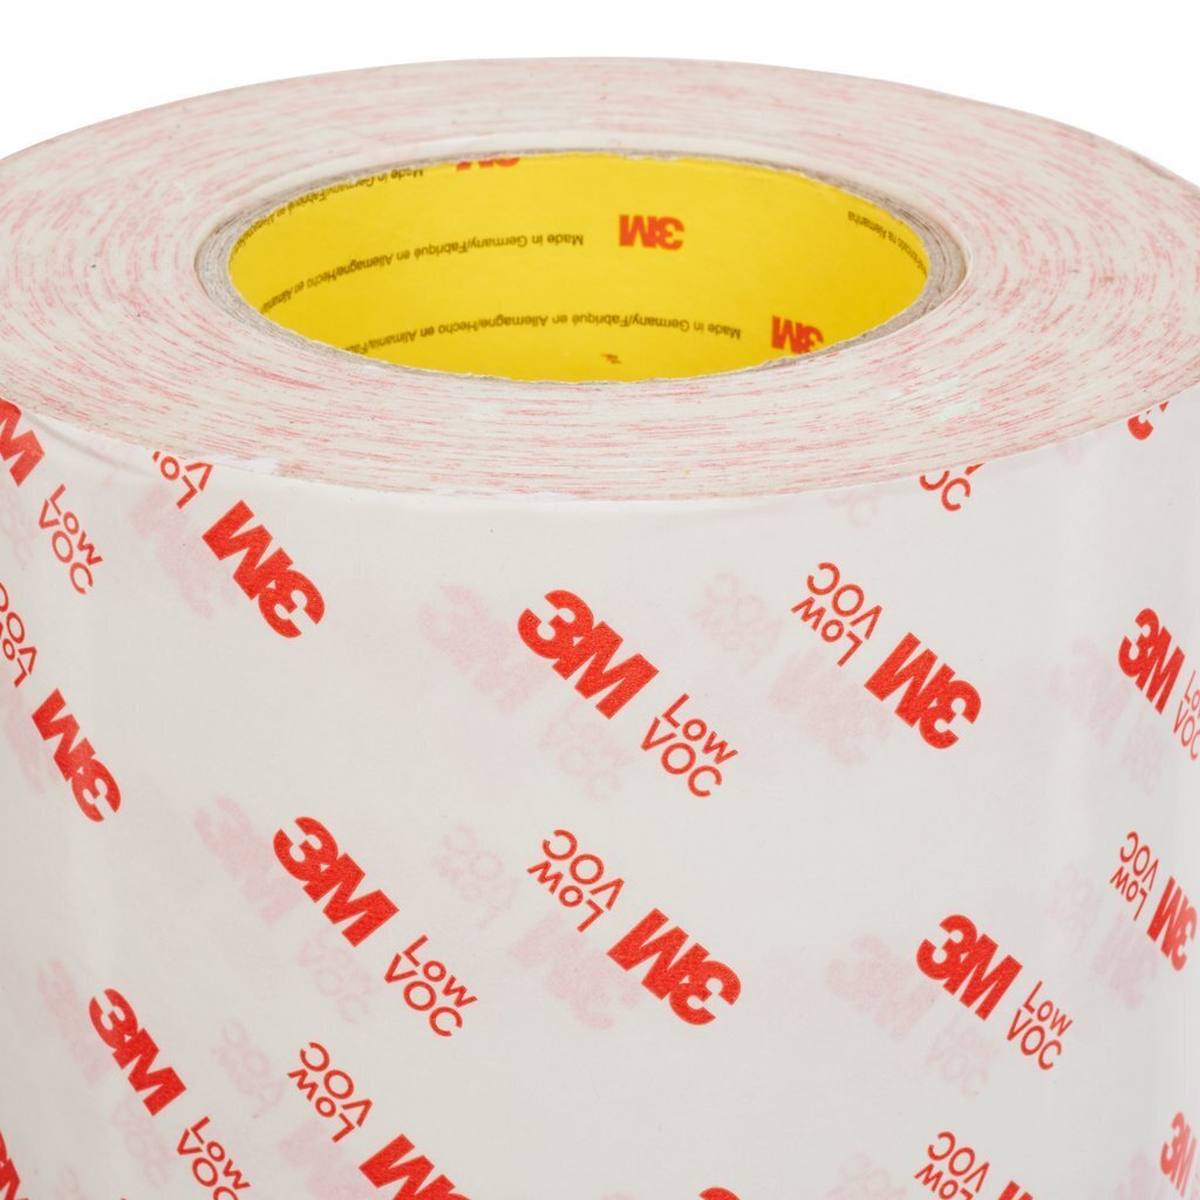 3M Double-sided adhesive tape with non-woven paper backing 99015LVC, white, 19 mm x 50 m, 0.15 mm